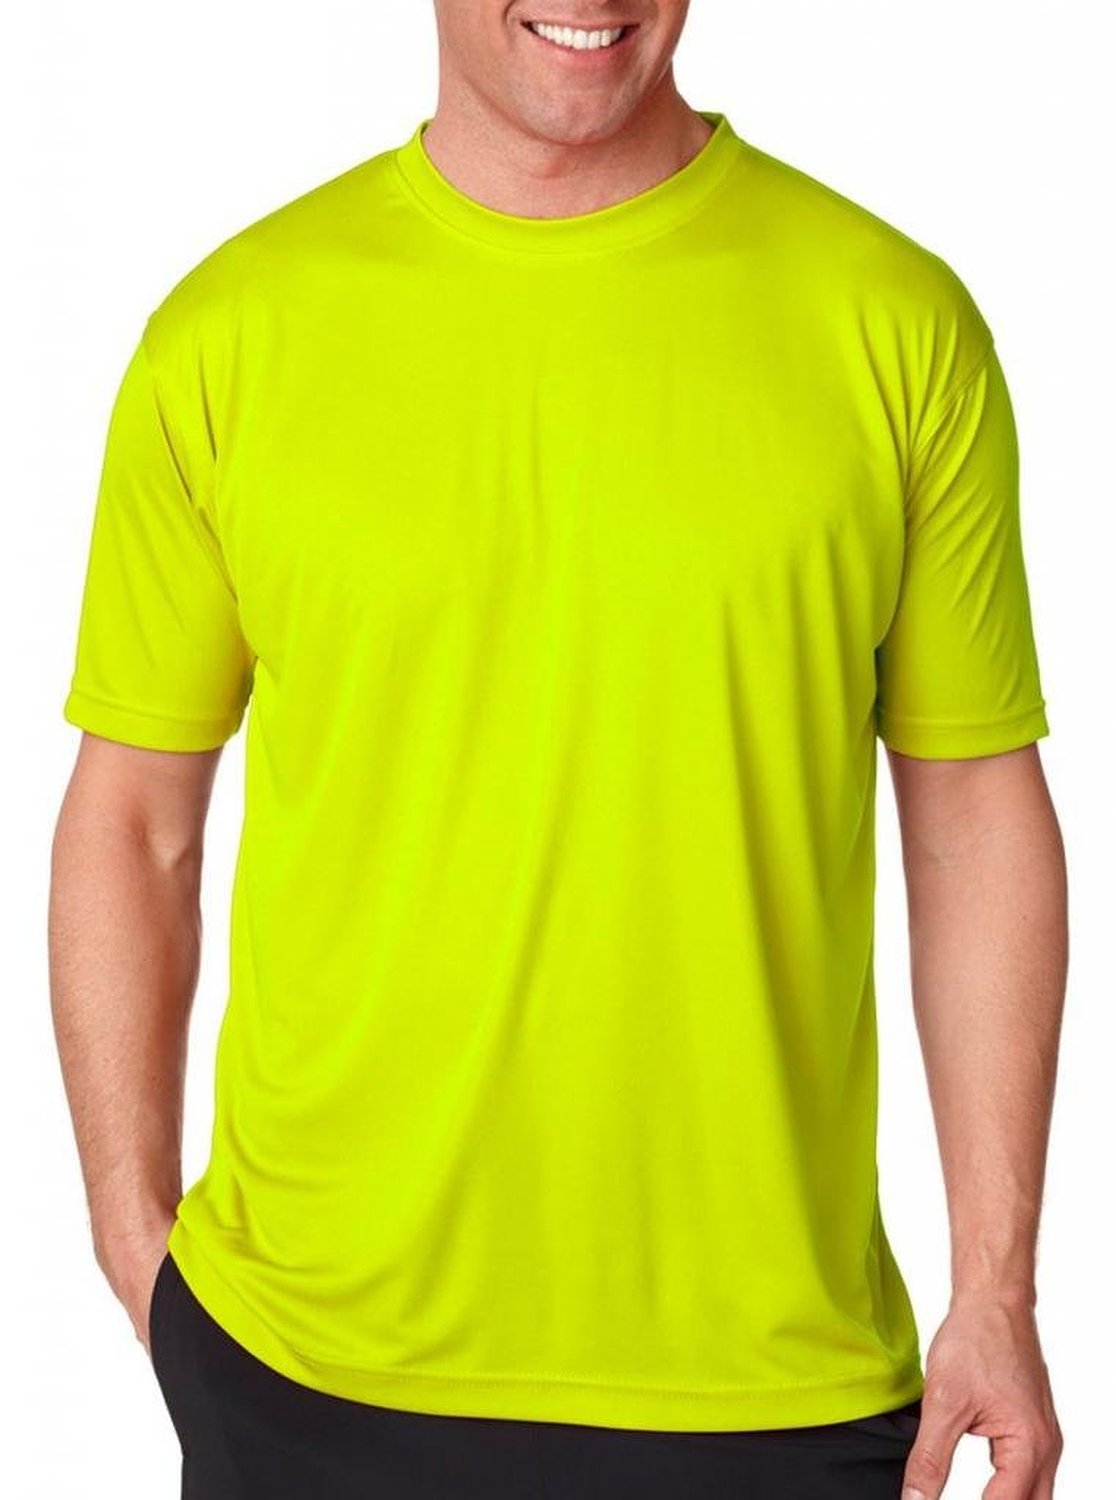 Moisture-wicking men's cool and dry sport performance tee.